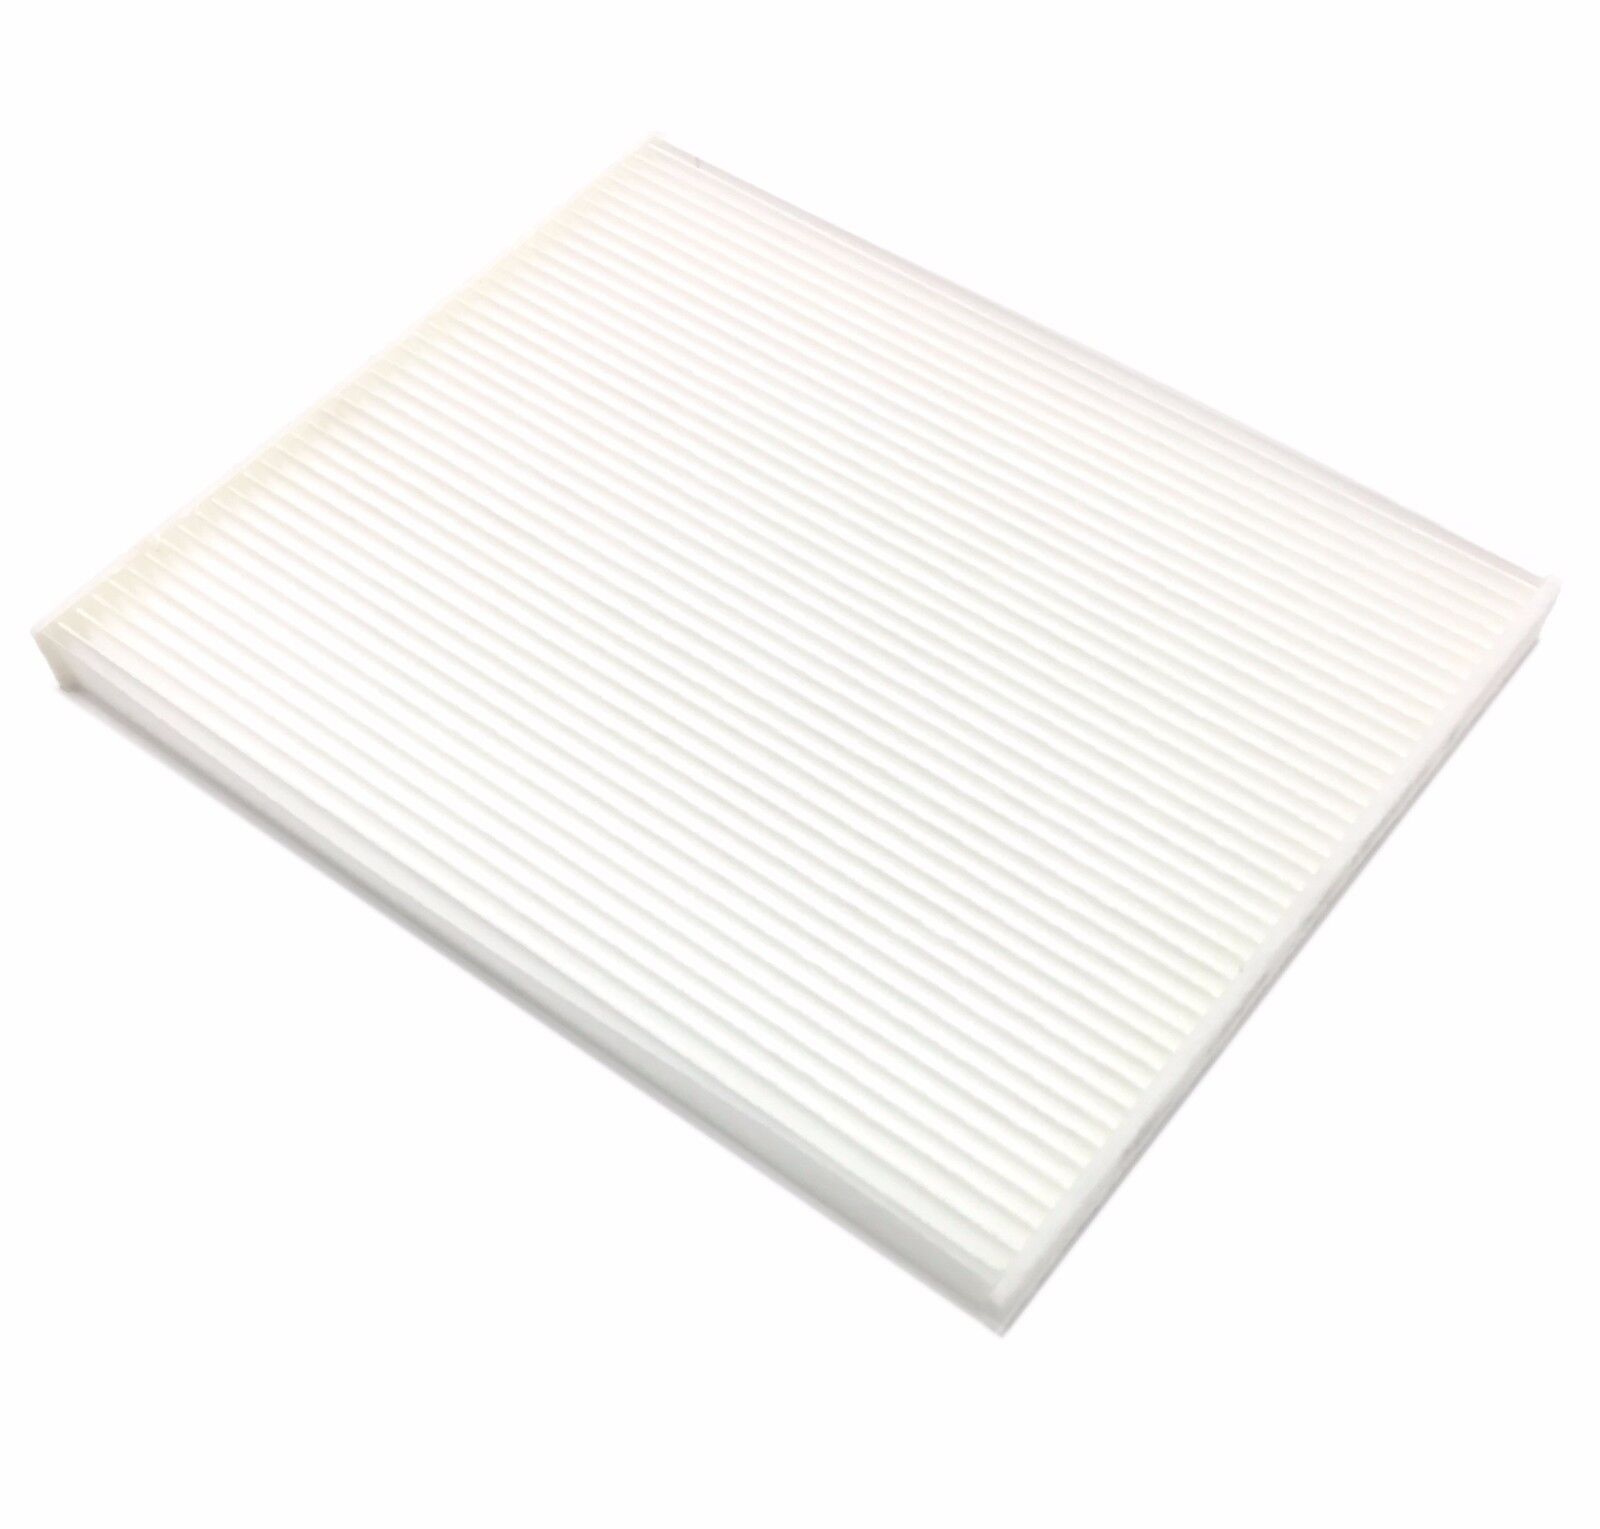 C36286 Cabin air filter for 2015-21 Ford Edge 2013-20 Fusion 2016-18 Lincoln MKX